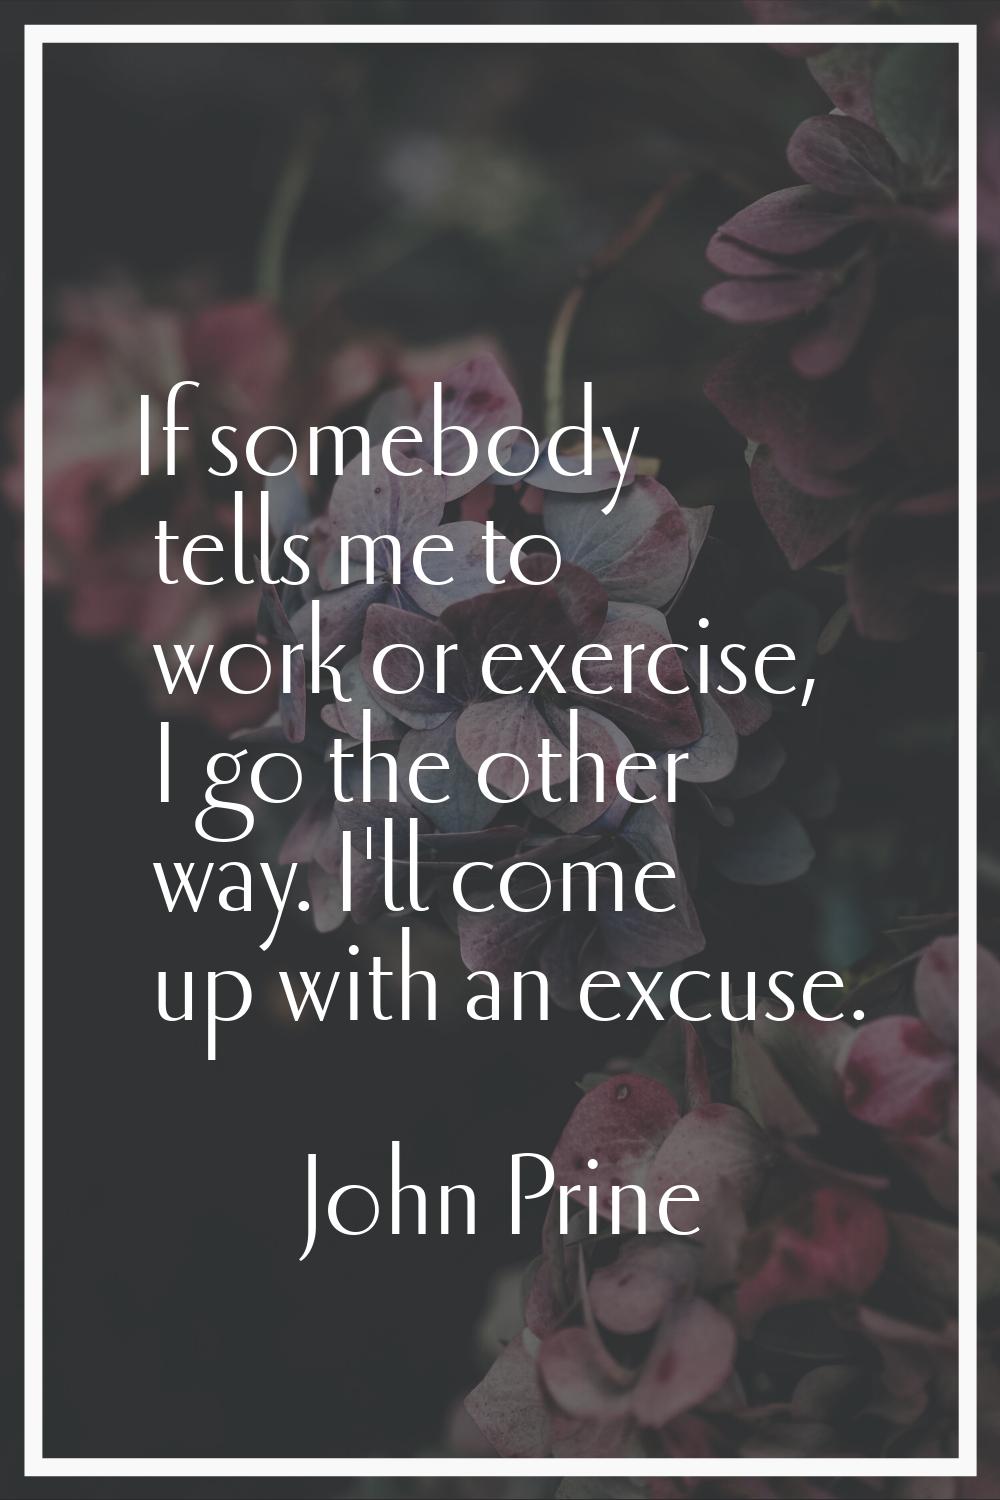 If somebody tells me to work or exercise, I go the other way. I'll come up with an excuse.